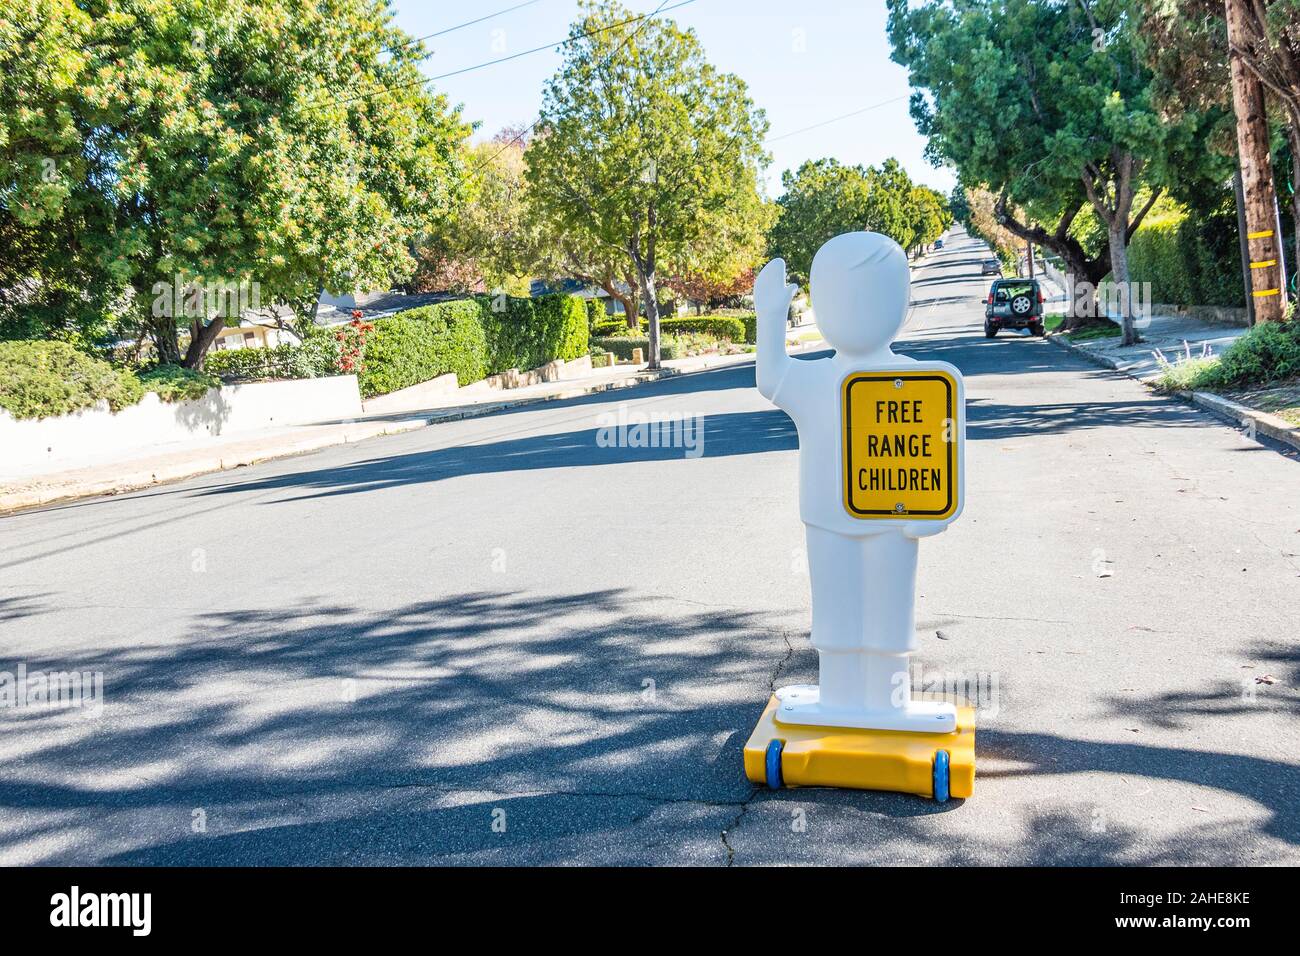 A very humorous sign in the street in front of a house with chiildren that states 'free range children' on a human-like figure to alert drivers. Stock Photo